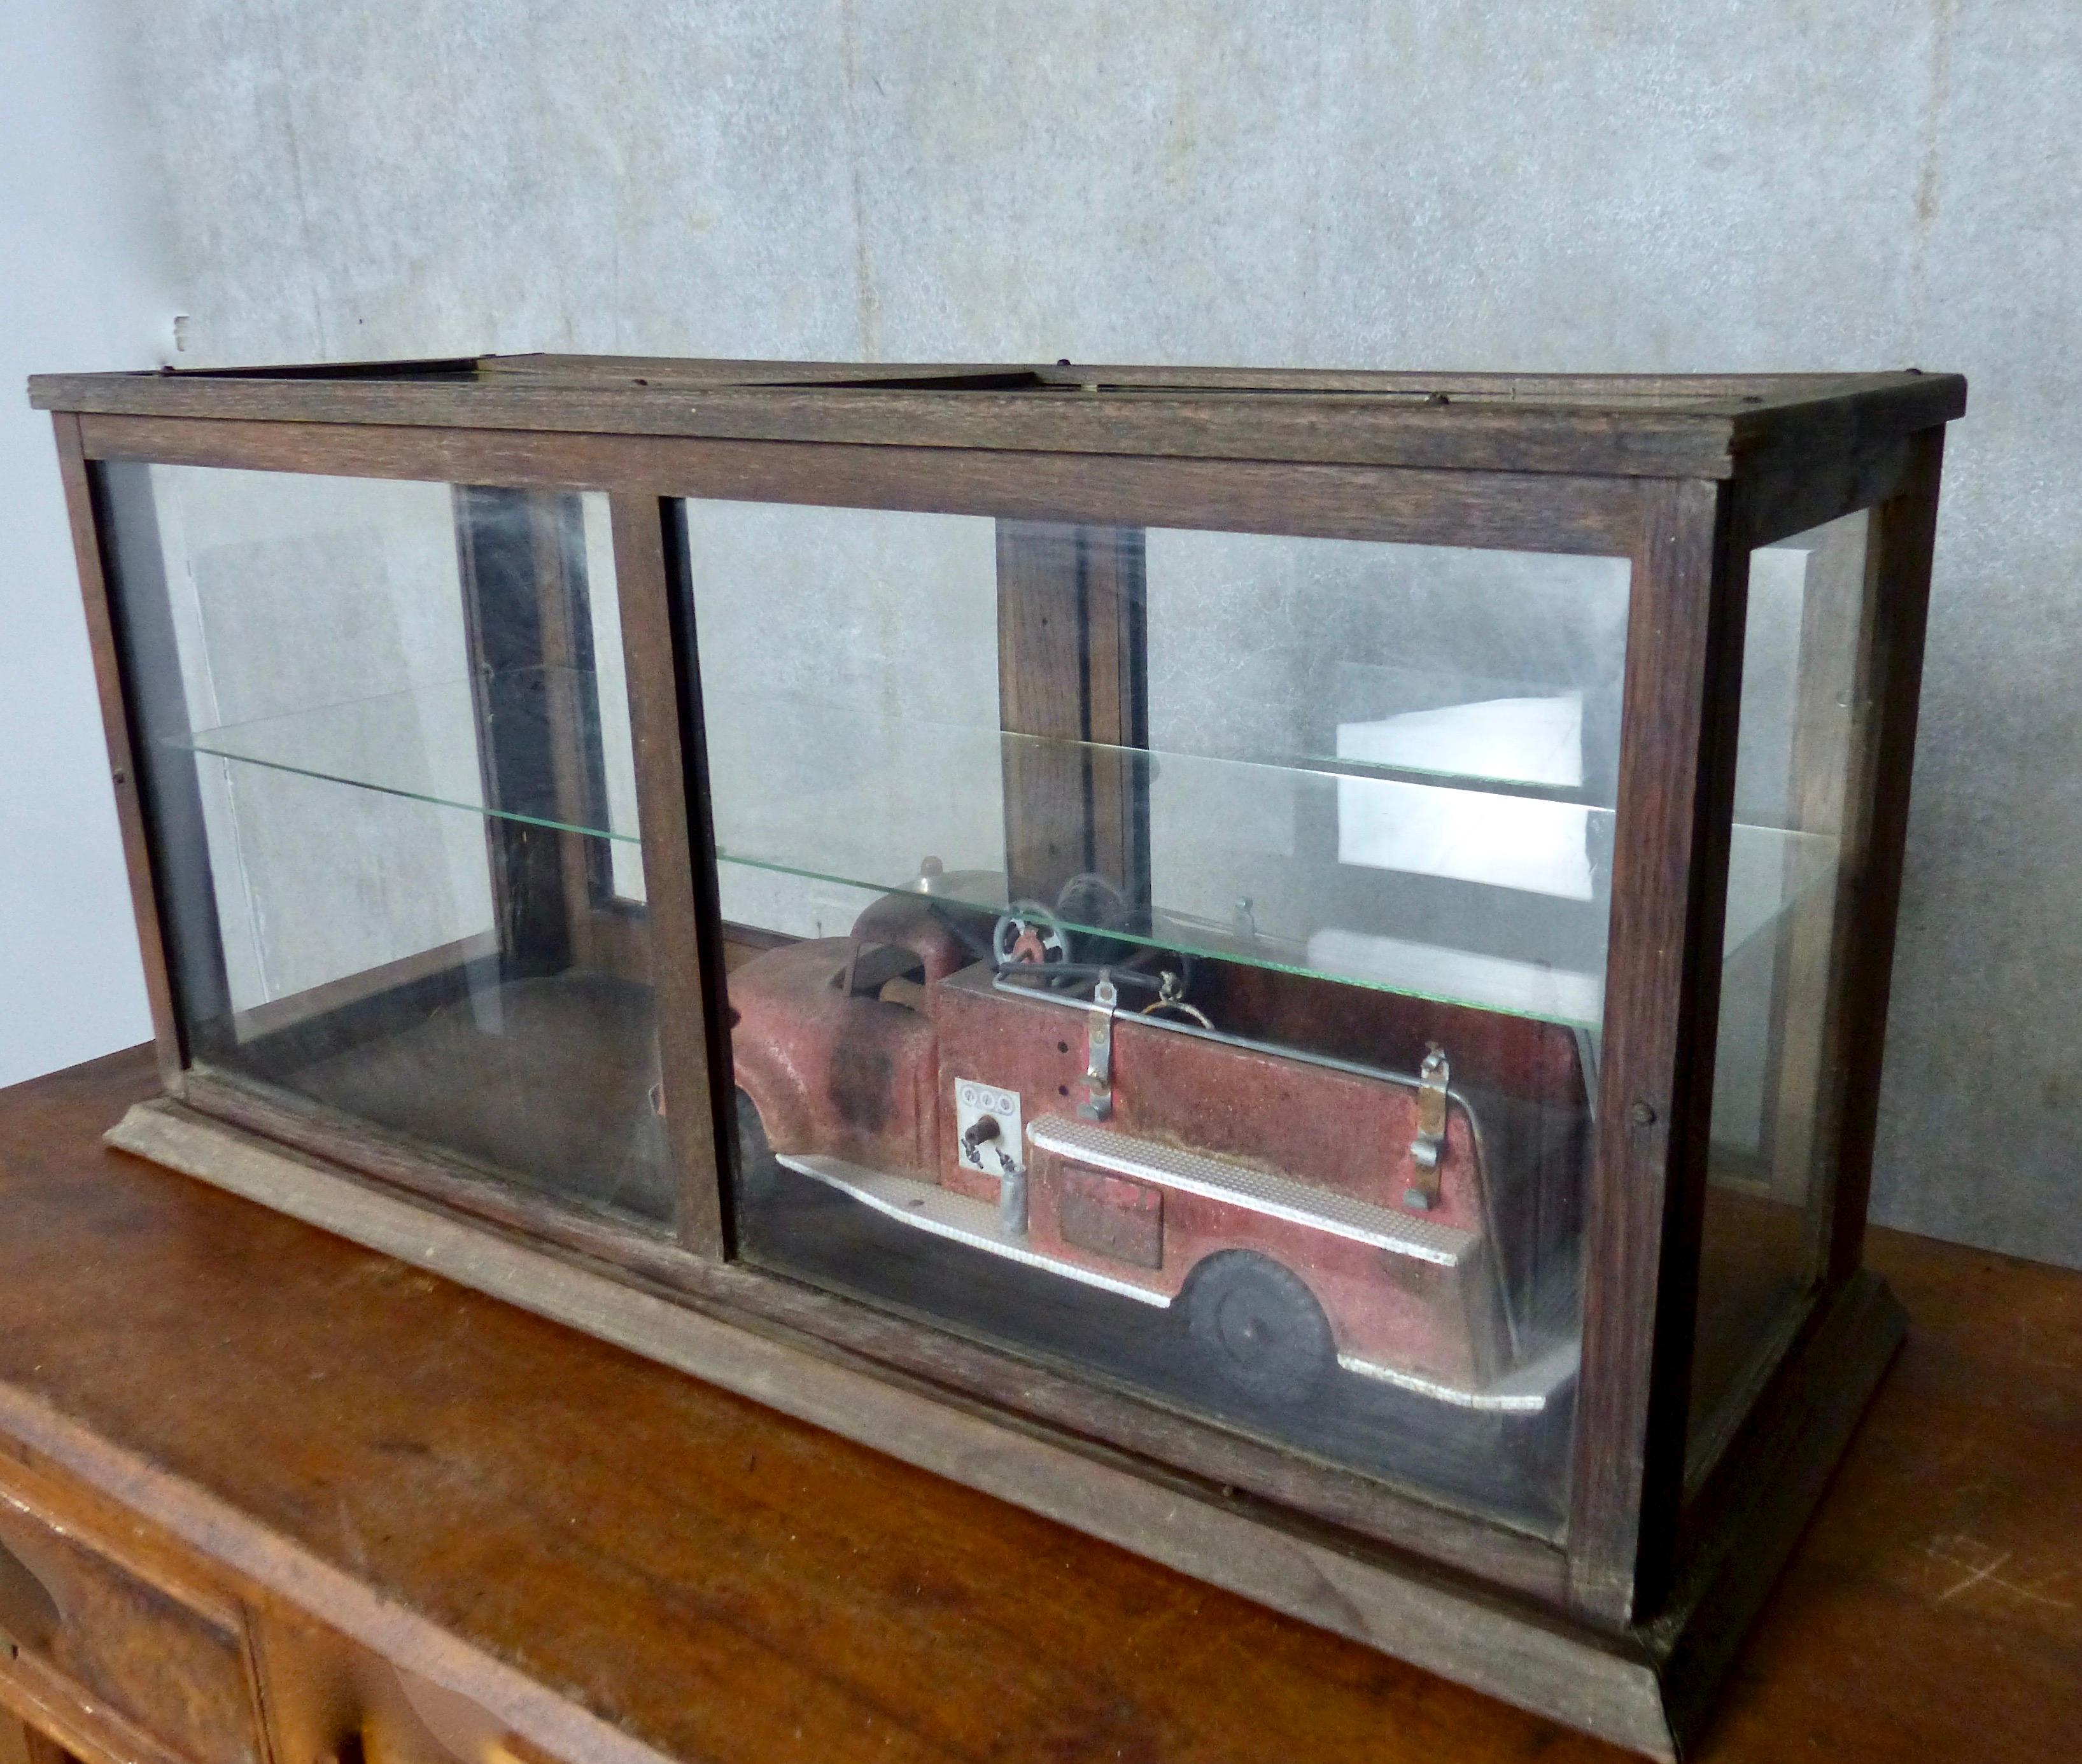 Fully glassed-in tabletop retail display cabinet. Solid oak frame; glass top; two doors in rear of case. A clean-lined case to house a unique collectible.
Dimensions: 15